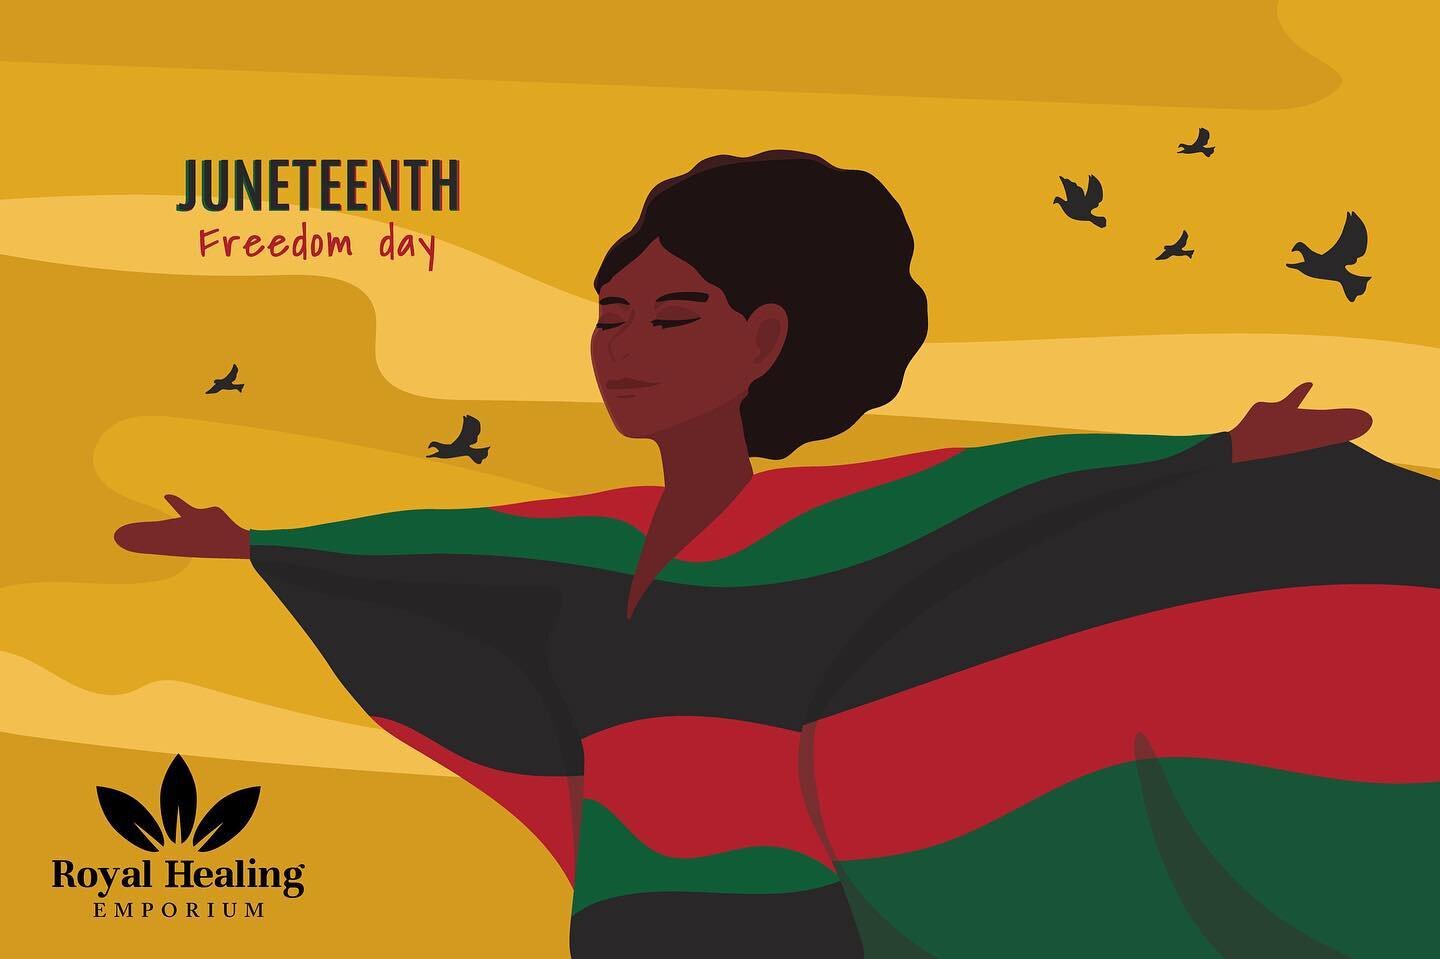 #Juneteenth&nbsp;A day to celebrate freedom and reflect on the continuing struggle for equality in all forms. Happy Freedom Day! 👊 #royalhelingemporium